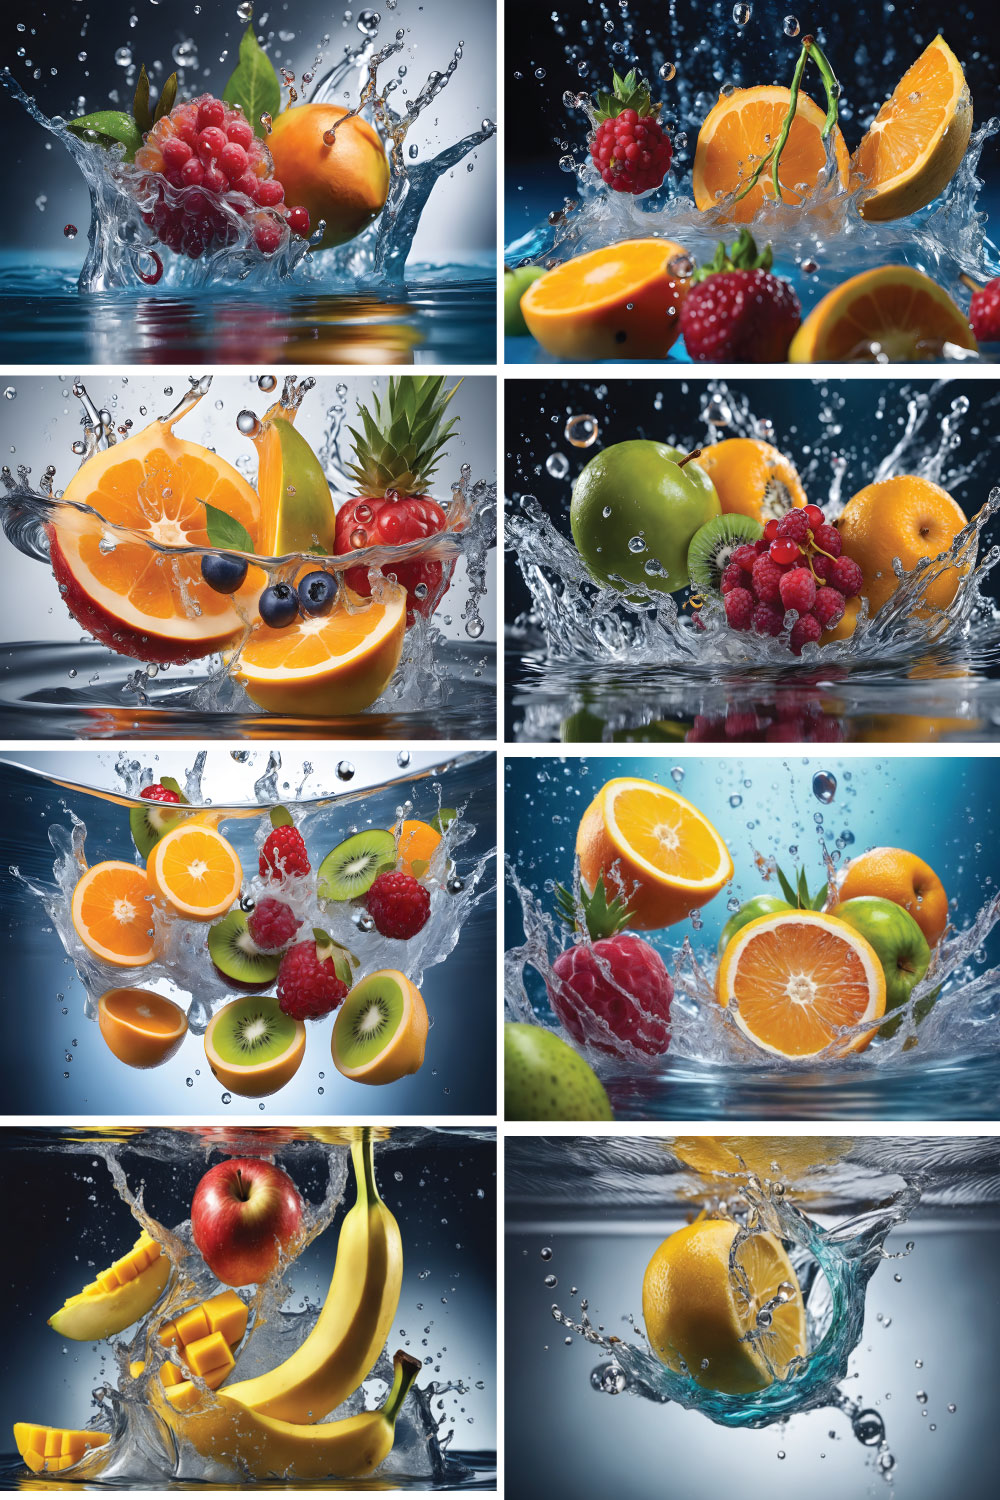 43 set Bundle of fruits falling into water with splashes jpg for 4$ Only pinterest preview image.